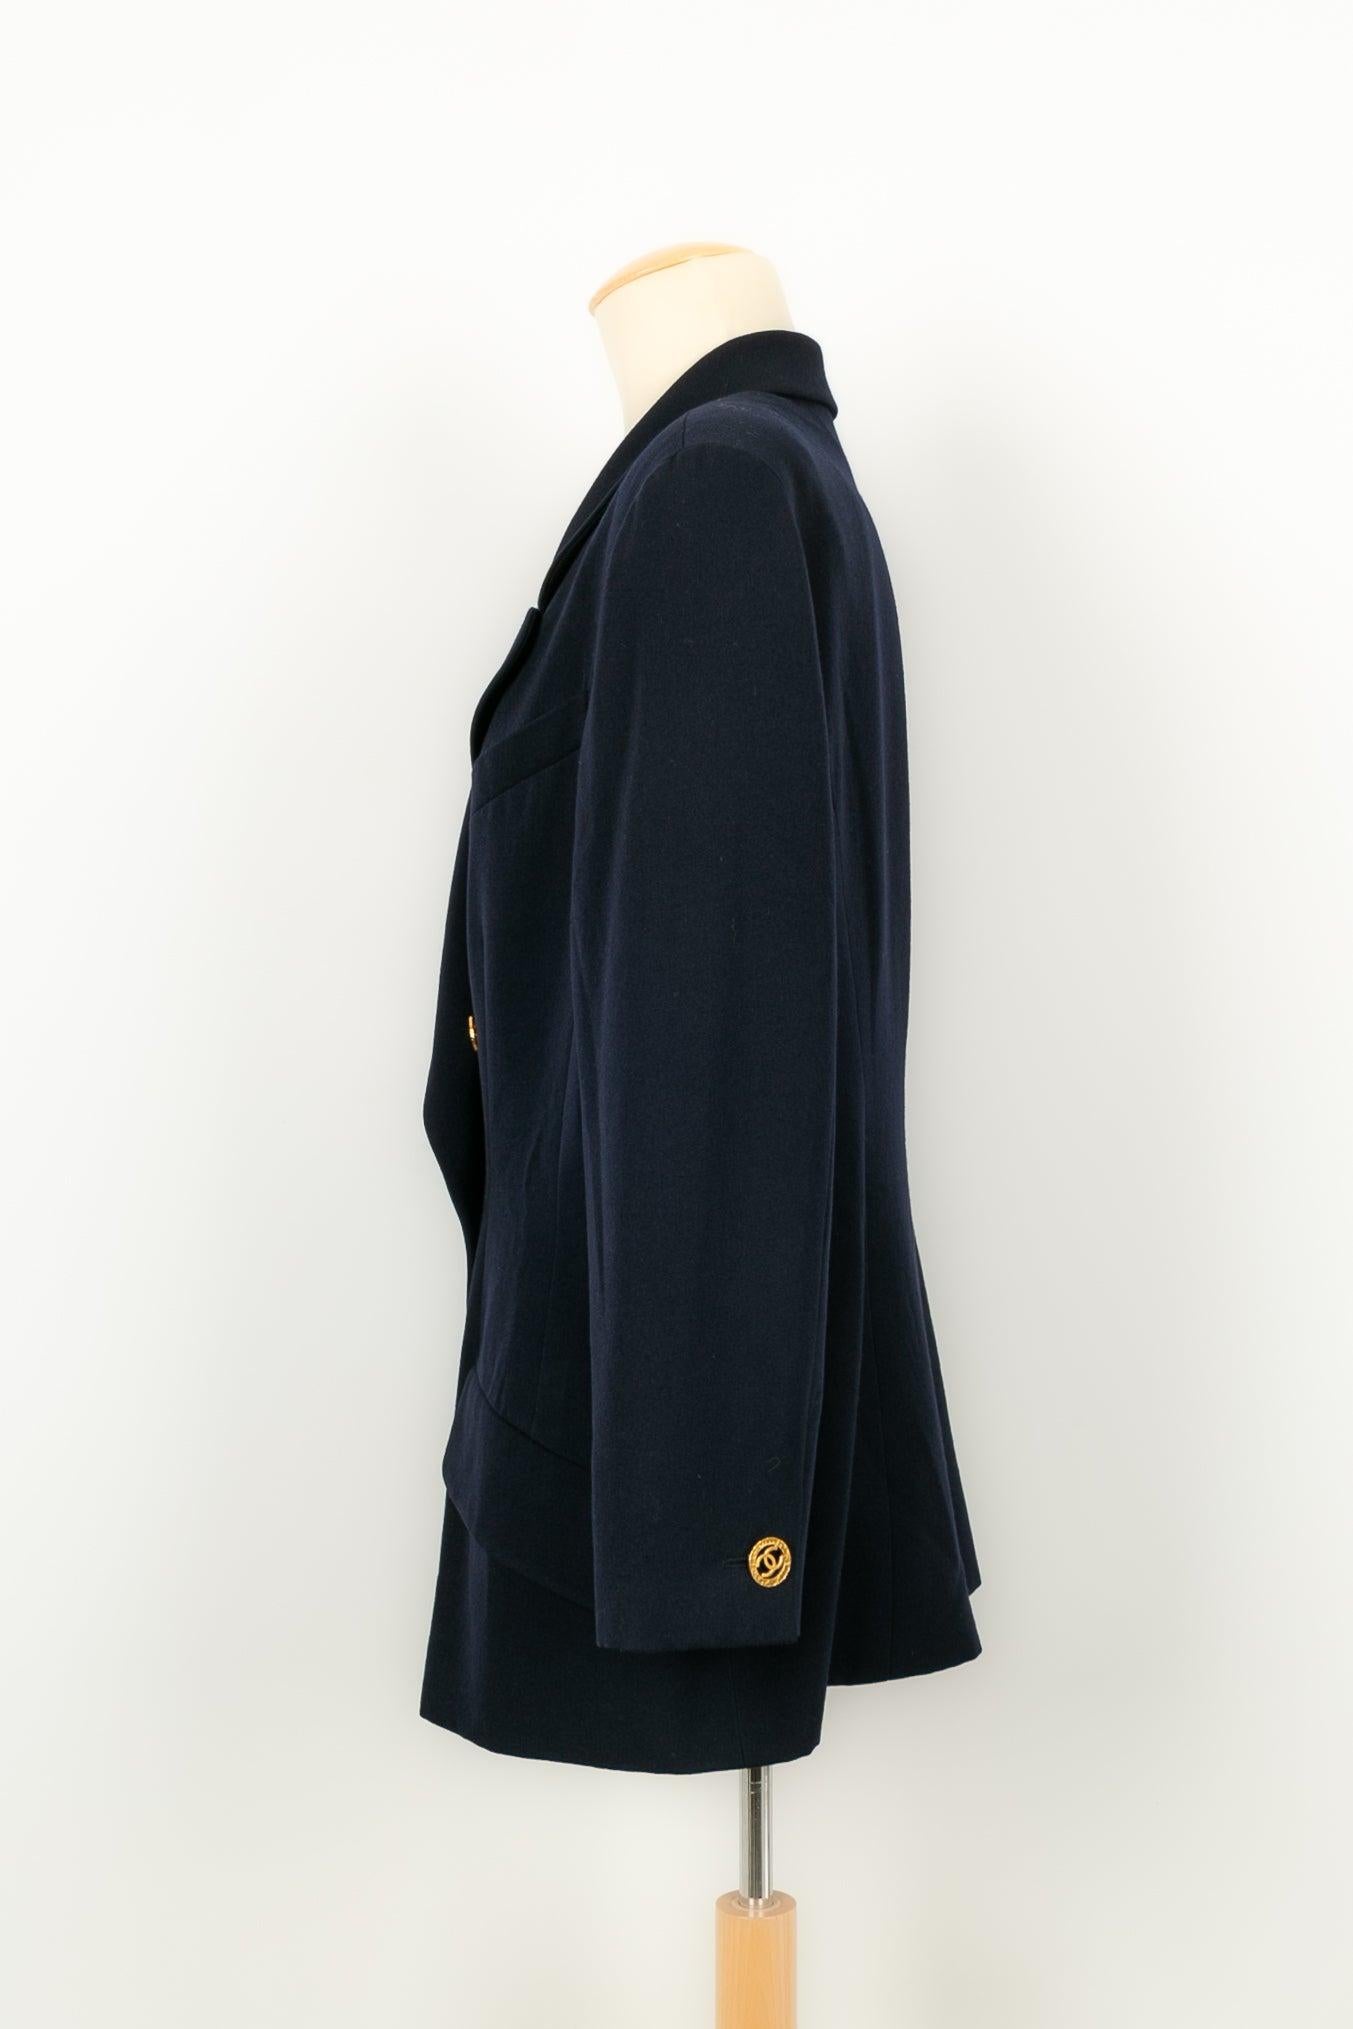 Chanel - Navy blue wool jacket with a silk lining. No size nor composition label, it fits a 44FR. Jacket from the 1990s.

Additional information:
Condition: Very good condition
Dimensions: Shoulder width: 44 cm - Sleeve length: 55 cm - Length: 70